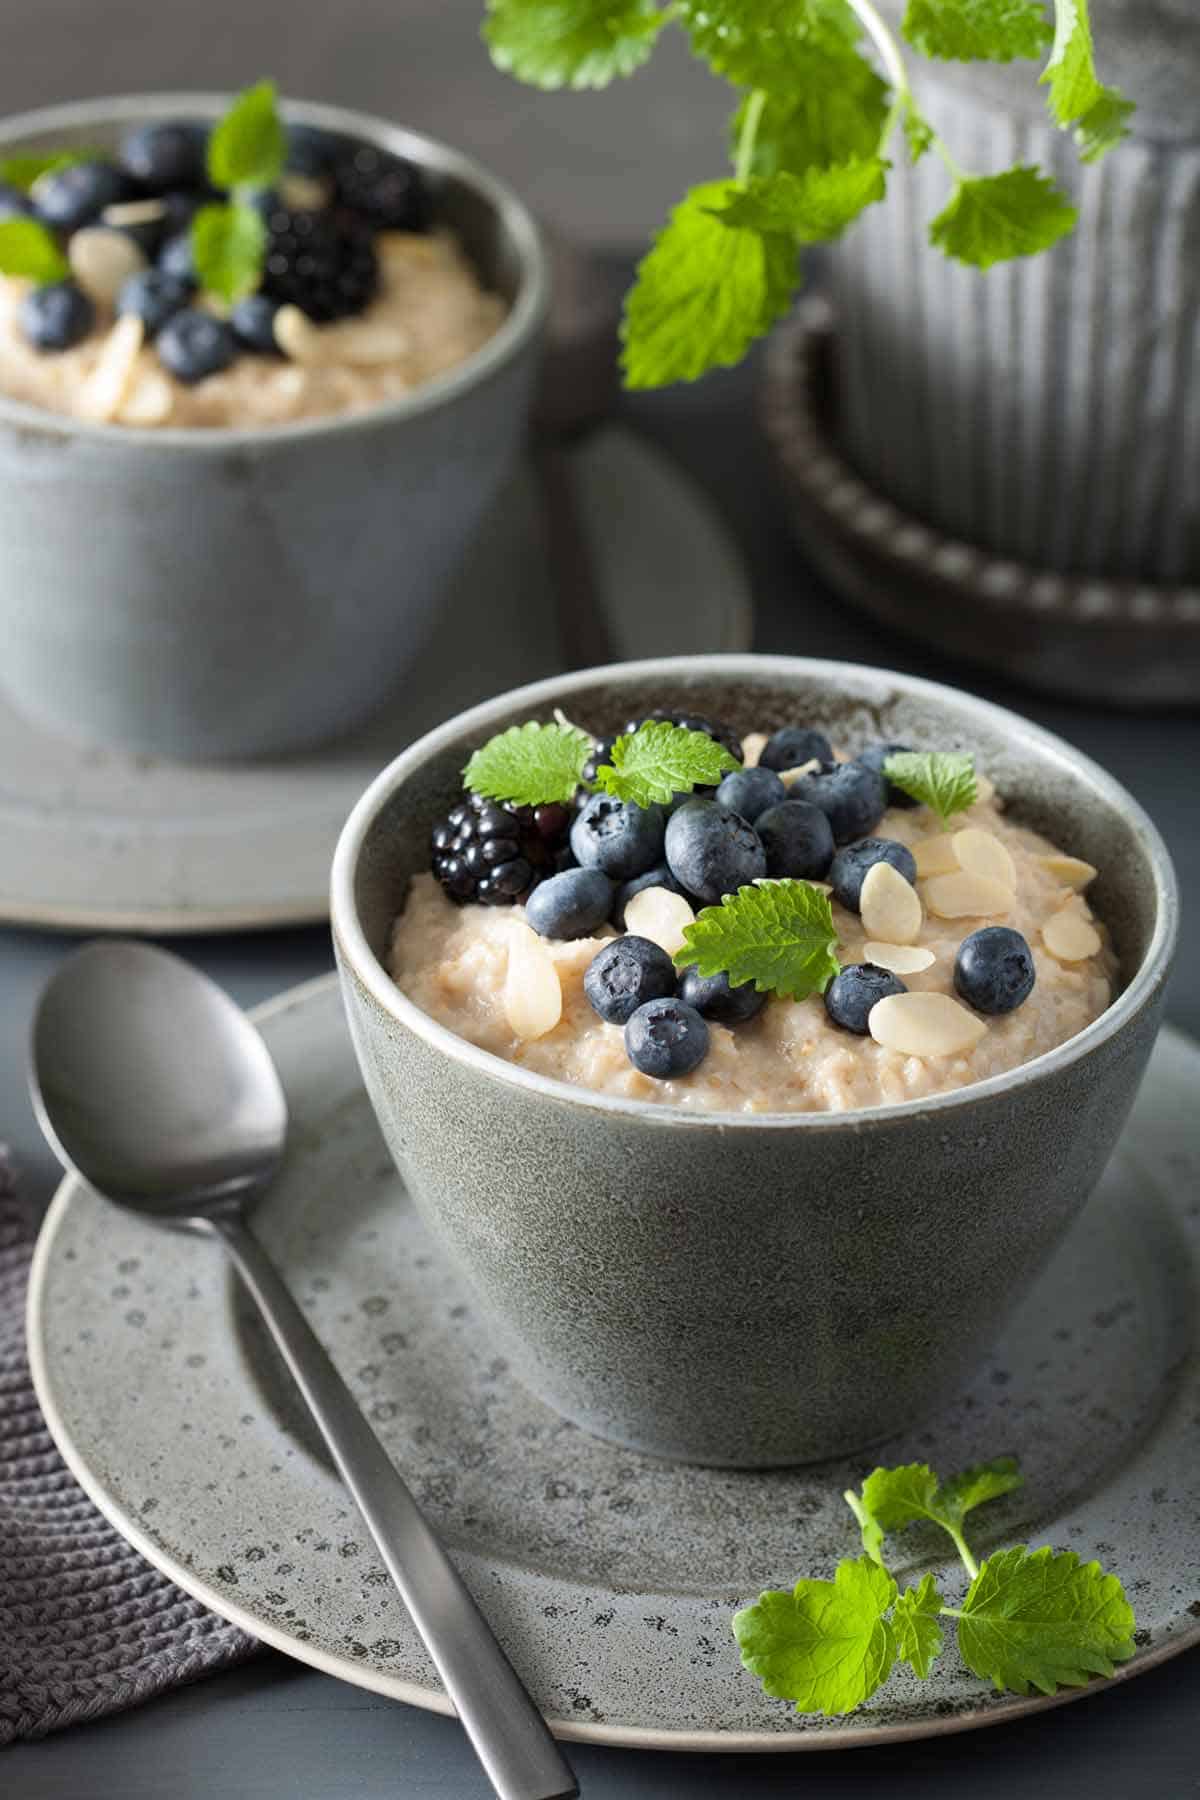 Cup of steel cut oatmeal garnished with almond slices, blueberries, blackberries and mint.